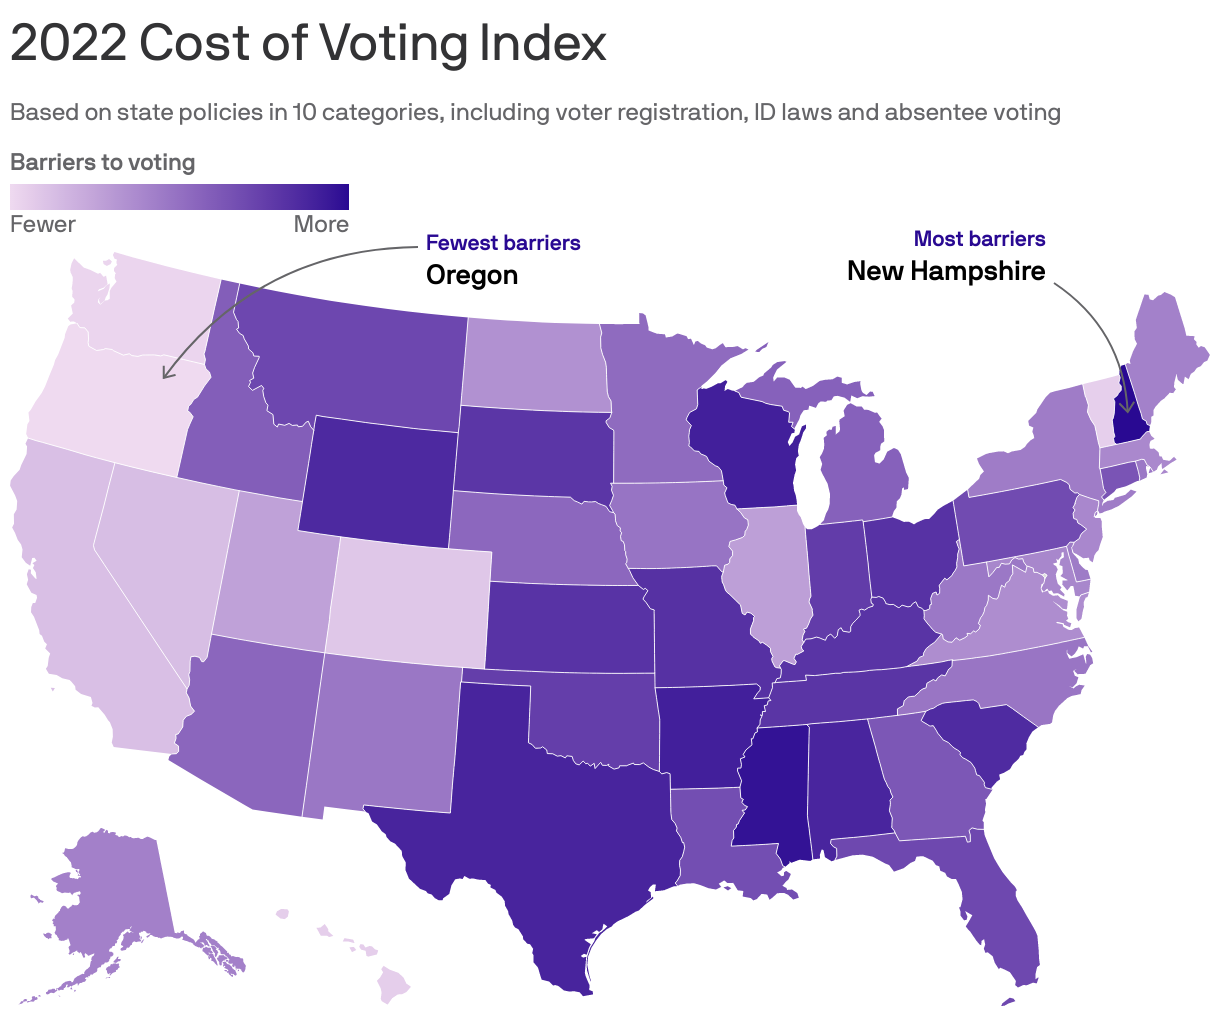 2022 Cost of Voting Index